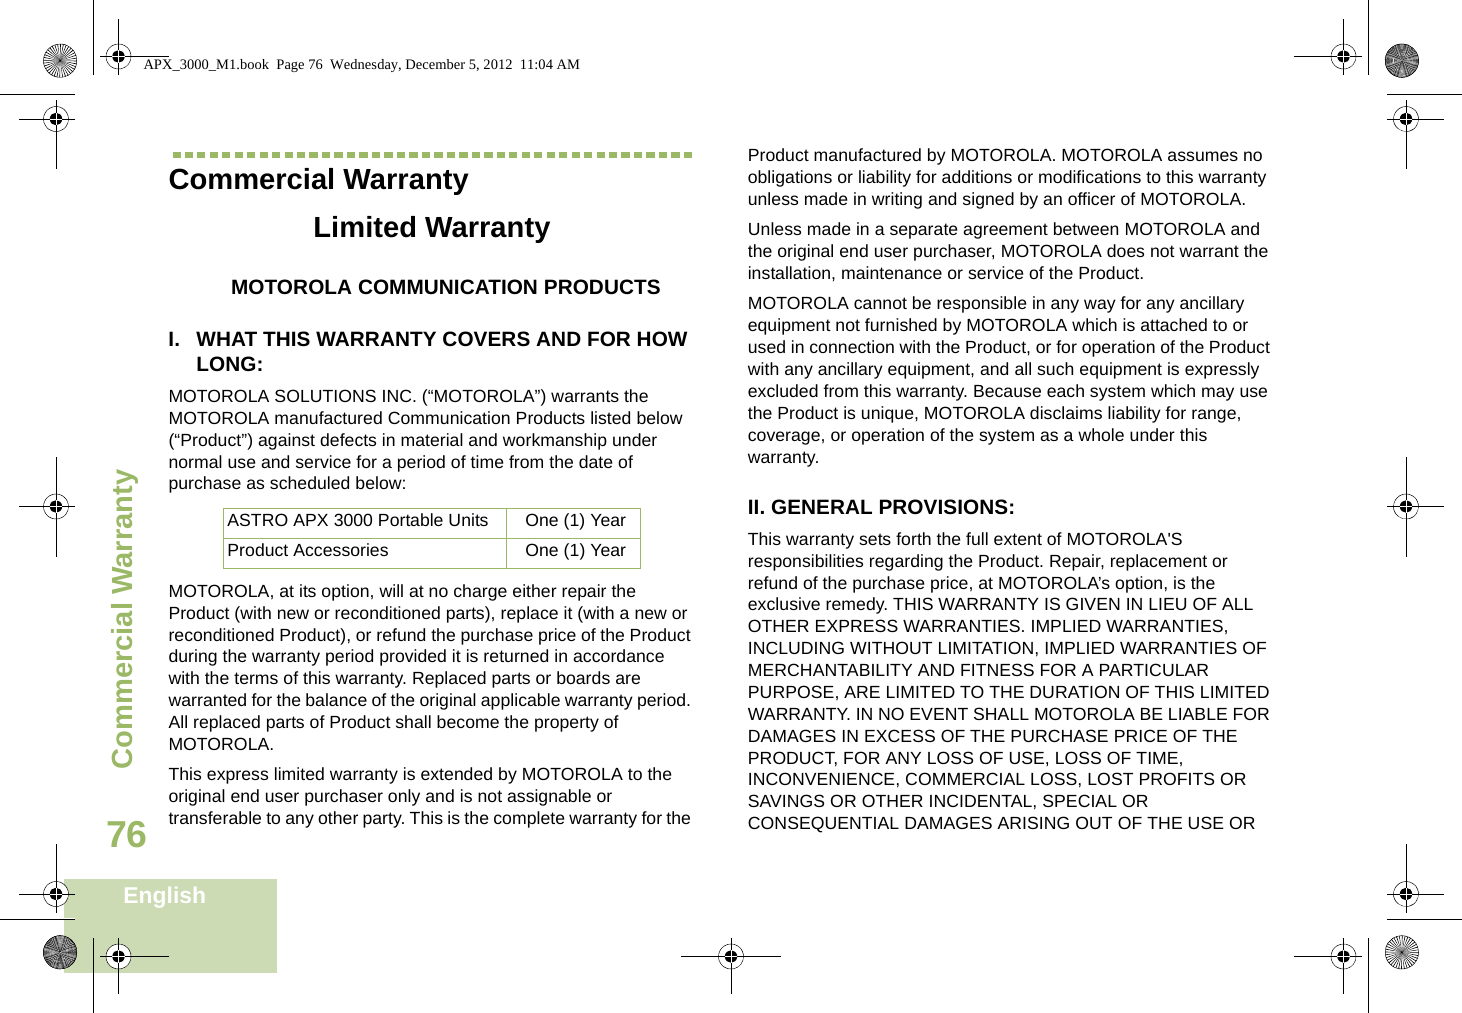 Commercial WarrantyEnglish76Commercial WarrantyLimited WarrantyMOTOROLA COMMUNICATION PRODUCTSI. WHAT THIS WARRANTY COVERS AND FOR HOW LONG:MOTOROLA SOLUTIONS INC. (“MOTOROLA”) warrants the MOTOROLA manufactured Communication Products listed below (“Product”) against defects in material and workmanship under normal use and service for a period of time from the date of purchase as scheduled below:MOTOROLA, at its option, will at no charge either repair the Product (with new or reconditioned parts), replace it (with a new or reconditioned Product), or refund the purchase price of the Product during the warranty period provided it is returned in accordance with the terms of this warranty. Replaced parts or boards are warranted for the balance of the original applicable warranty period. All replaced parts of Product shall become the property of MOTOROLA.This express limited warranty is extended by MOTOROLA to the original end user purchaser only and is not assignable or transferable to any other party. This is the complete warranty for the Product manufactured by MOTOROLA. MOTOROLA assumes no obligations or liability for additions or modifications to this warranty unless made in writing and signed by an officer of MOTOROLA. Unless made in a separate agreement between MOTOROLA and the original end user purchaser, MOTOROLA does not warrant the installation, maintenance or service of the Product.MOTOROLA cannot be responsible in any way for any ancillary equipment not furnished by MOTOROLA which is attached to or used in connection with the Product, or for operation of the Product with any ancillary equipment, and all such equipment is expressly excluded from this warranty. Because each system which may use the Product is unique, MOTOROLA disclaims liability for range, coverage, or operation of the system as a whole under this warranty.II. GENERAL PROVISIONS:This warranty sets forth the full extent of MOTOROLA&apos;S responsibilities regarding the Product. Repair, replacement or refund of the purchase price, at MOTOROLA’s option, is the exclusive remedy. THIS WARRANTY IS GIVEN IN LIEU OF ALL OTHER EXPRESS WARRANTIES. IMPLIED WARRANTIES, INCLUDING WITHOUT LIMITATION, IMPLIED WARRANTIES OF MERCHANTABILITY AND FITNESS FOR A PARTICULAR PURPOSE, ARE LIMITED TO THE DURATION OF THIS LIMITED WARRANTY. IN NO EVENT SHALL MOTOROLA BE LIABLE FOR DAMAGES IN EXCESS OF THE PURCHASE PRICE OF THE PRODUCT, FOR ANY LOSS OF USE, LOSS OF TIME, INCONVENIENCE, COMMERCIAL LOSS, LOST PROFITS OR SAVINGS OR OTHER INCIDENTAL, SPECIAL OR CONSEQUENTIAL DAMAGES ARISING OUT OF THE USE OR ASTRO APX 3000 Portable Units One (1) YearProduct Accessories One (1) YearAPX_3000_M1.book  Page 76  Wednesday, December 5, 2012  11:04 AM